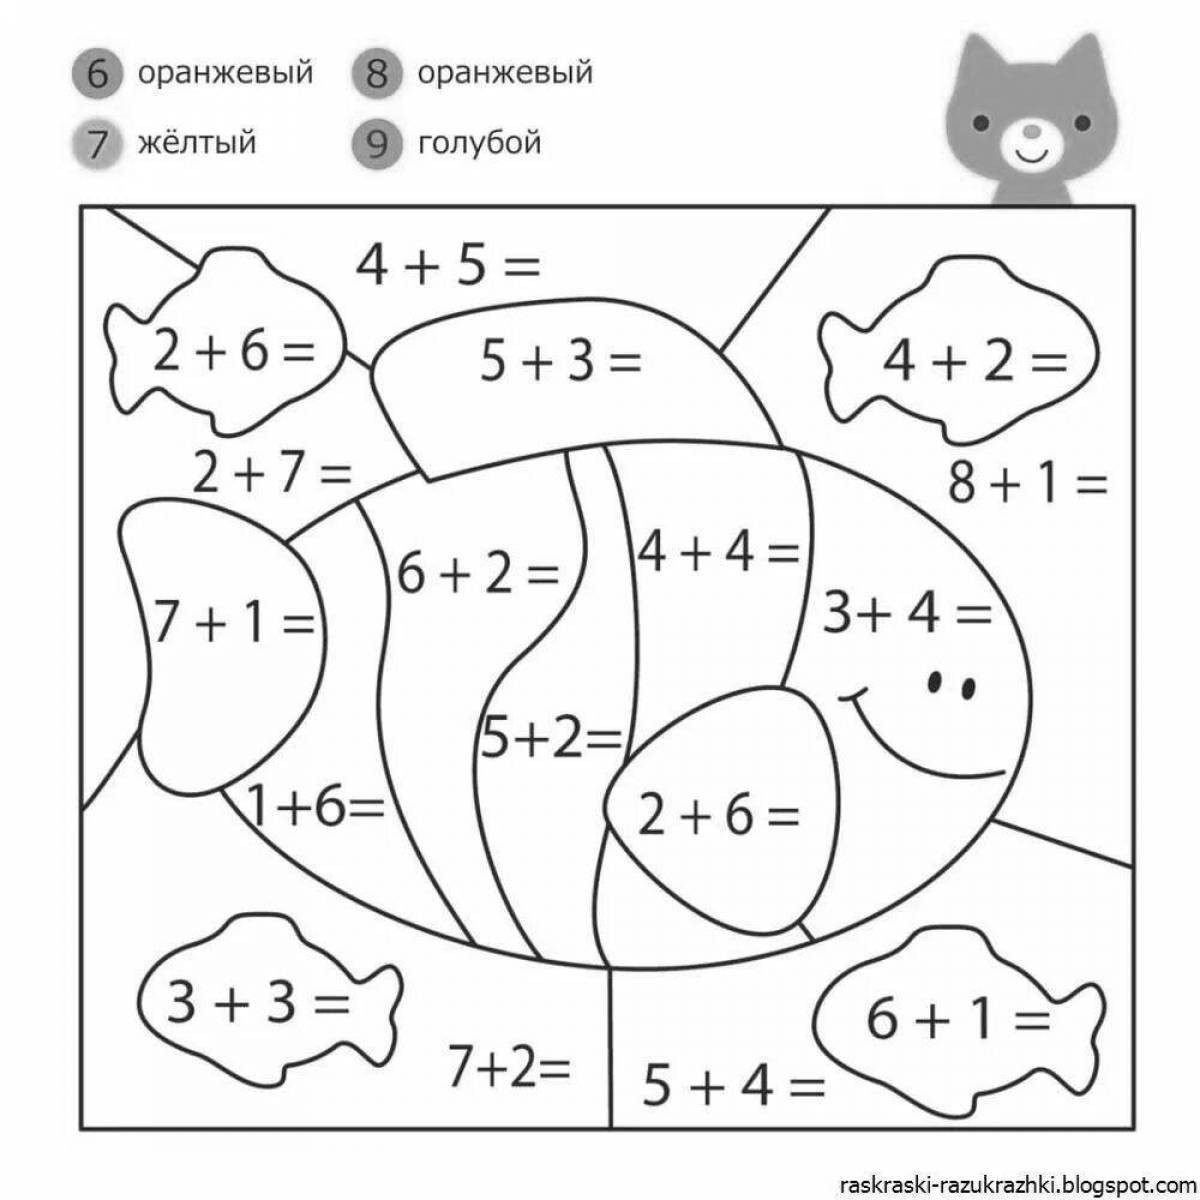 examples-for-preschoolers-6-7-years-old-in-math-12-download-or-print